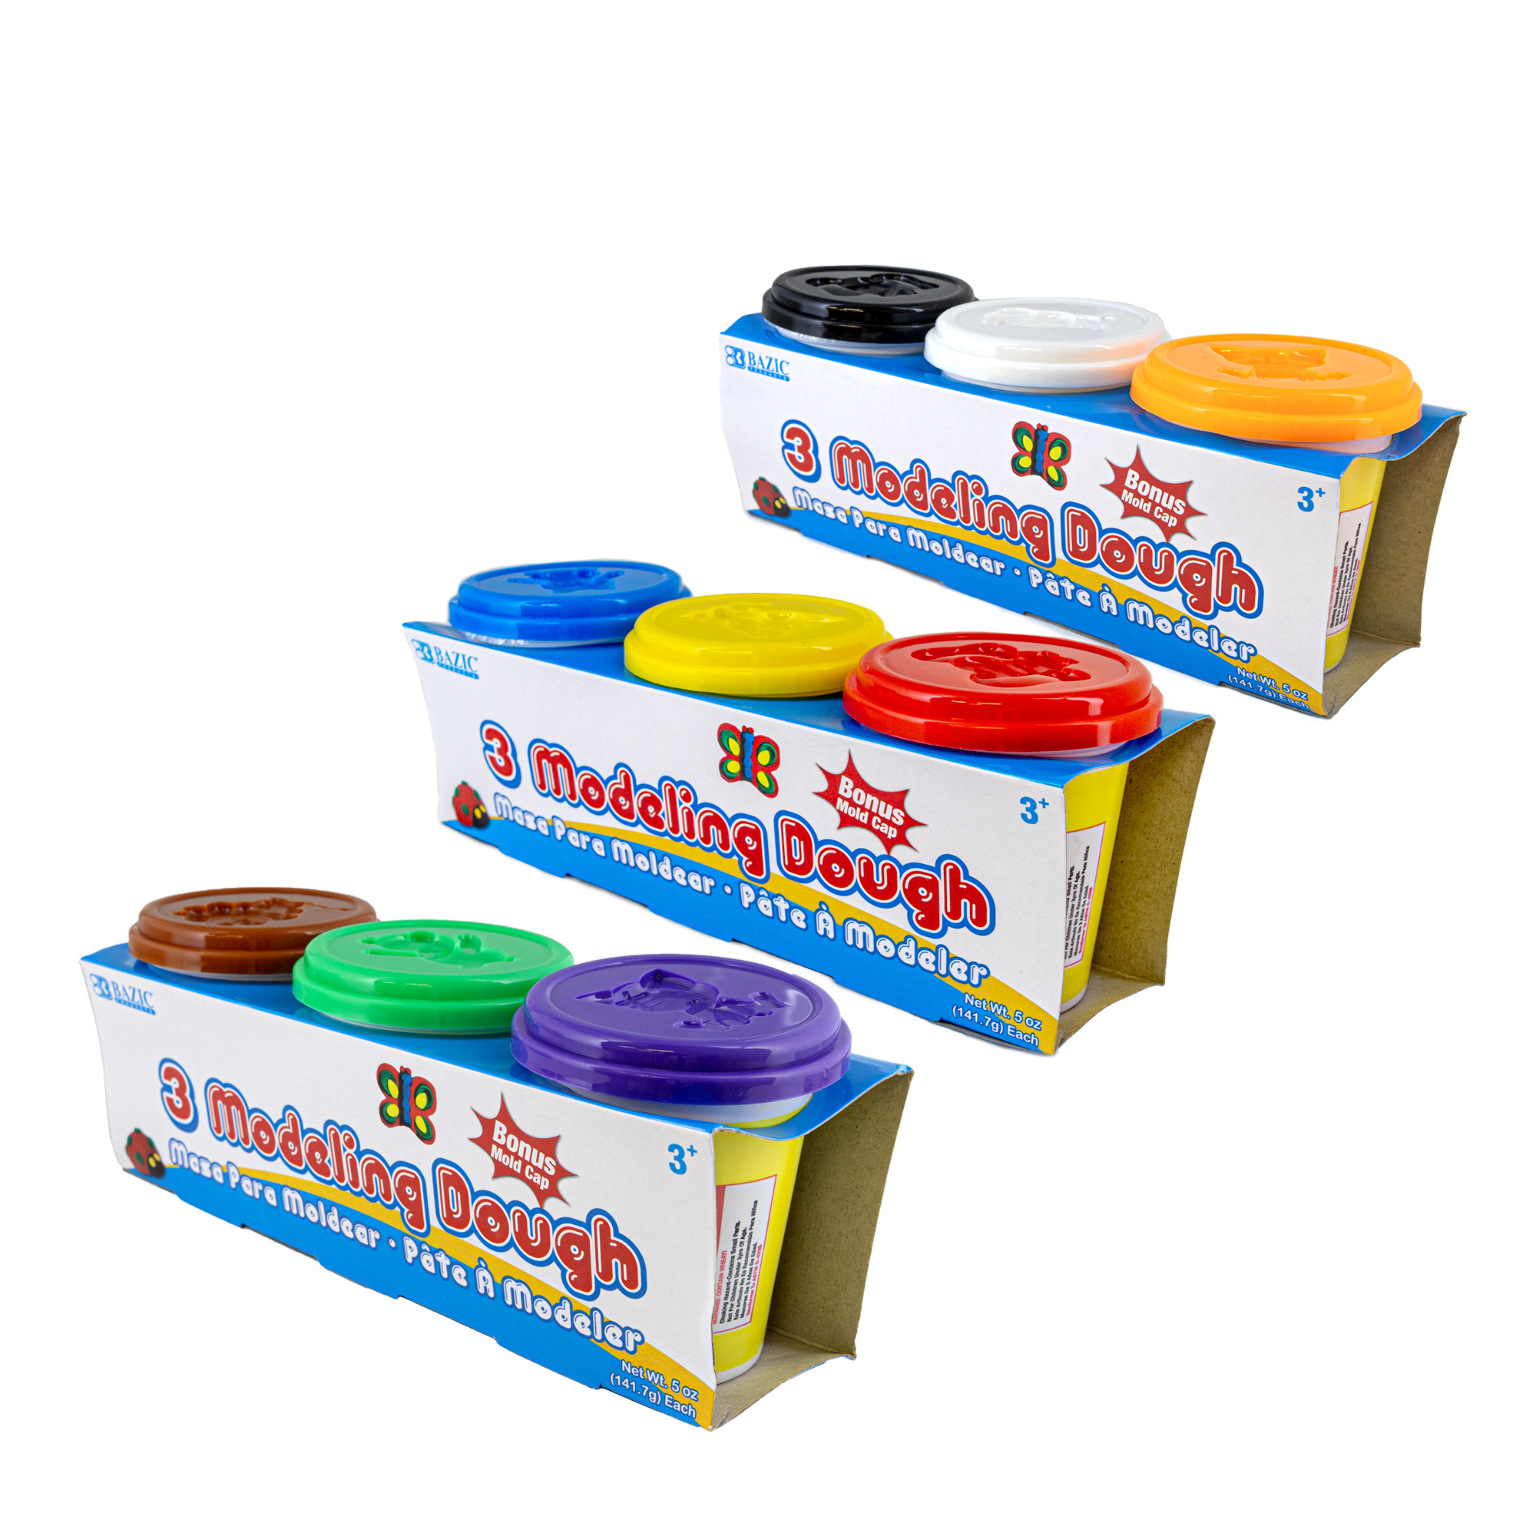 Baby Products Online - Play-Doh Bulk of non-toxic red modeling